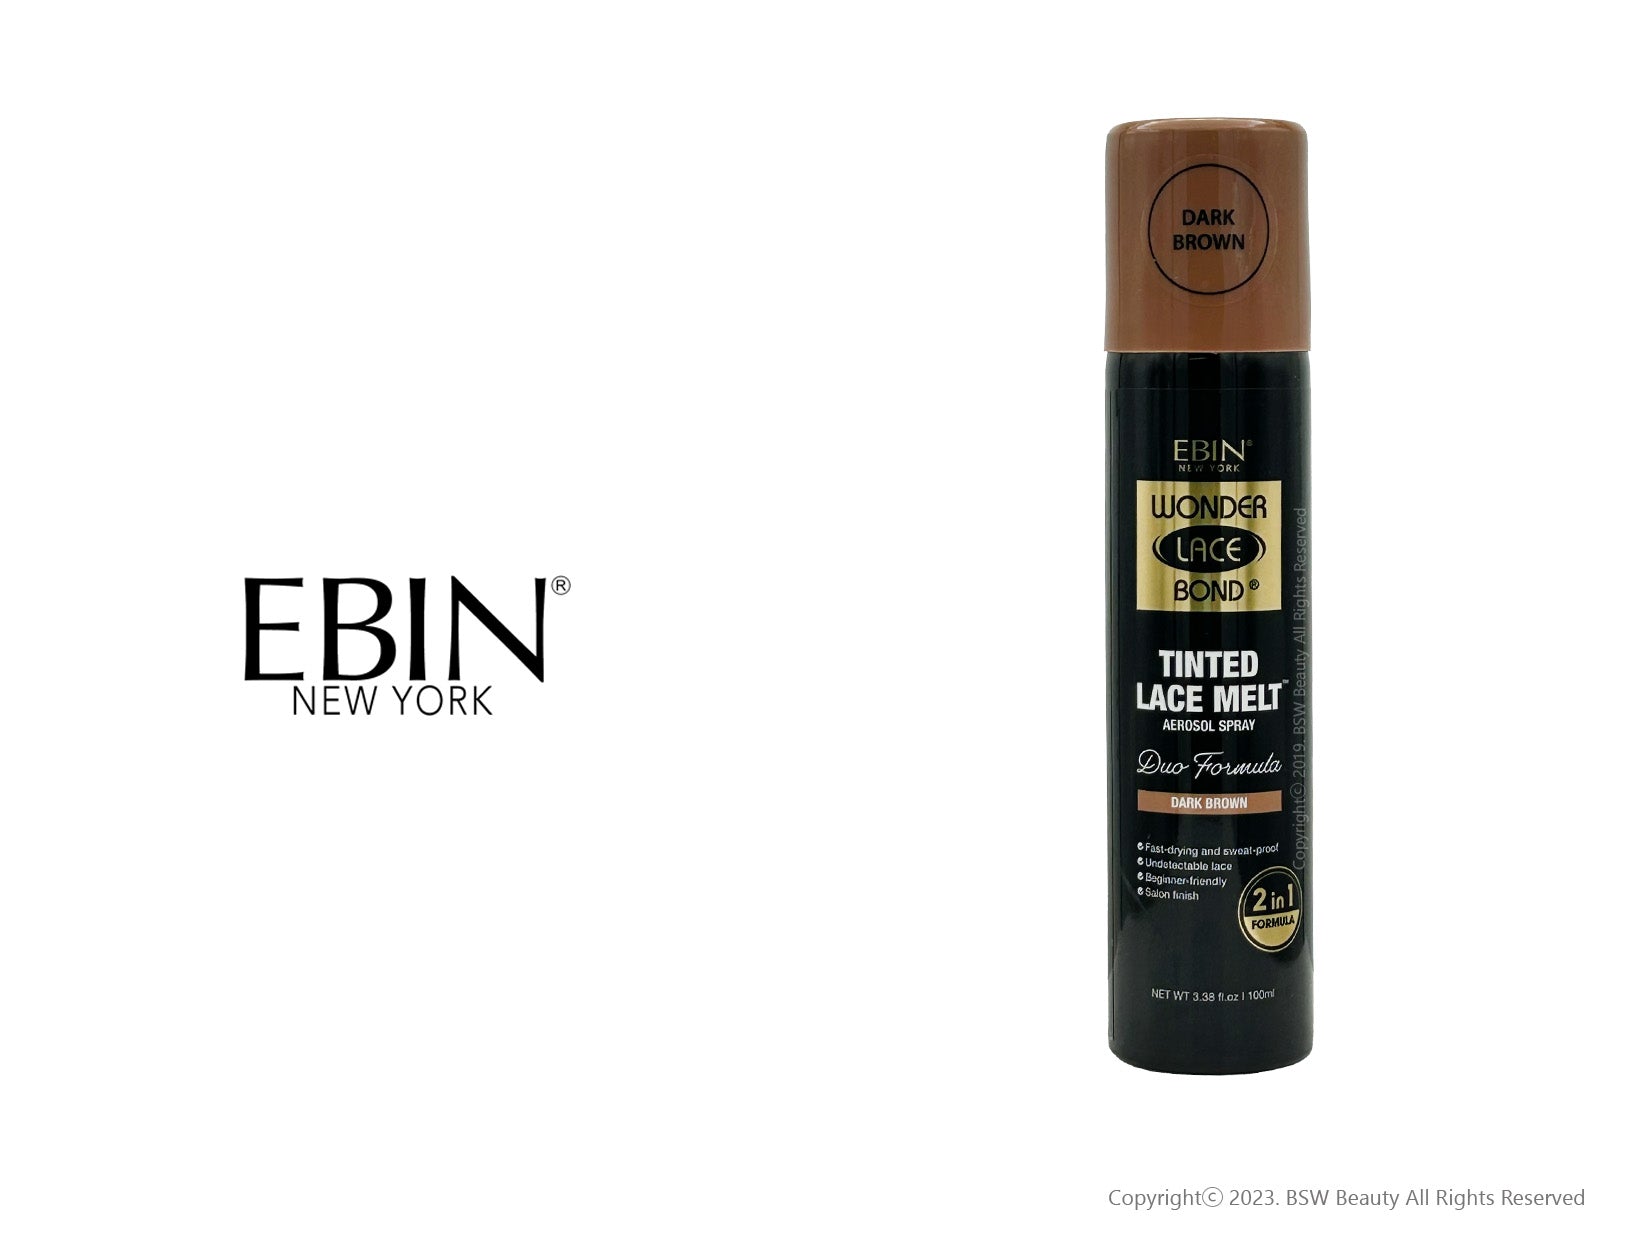  EBIN NEW YORK Tinted Lace Foaming Mousse - Light Warm Brown,  3.38oz/ 100ml : Beauty & Personal Care